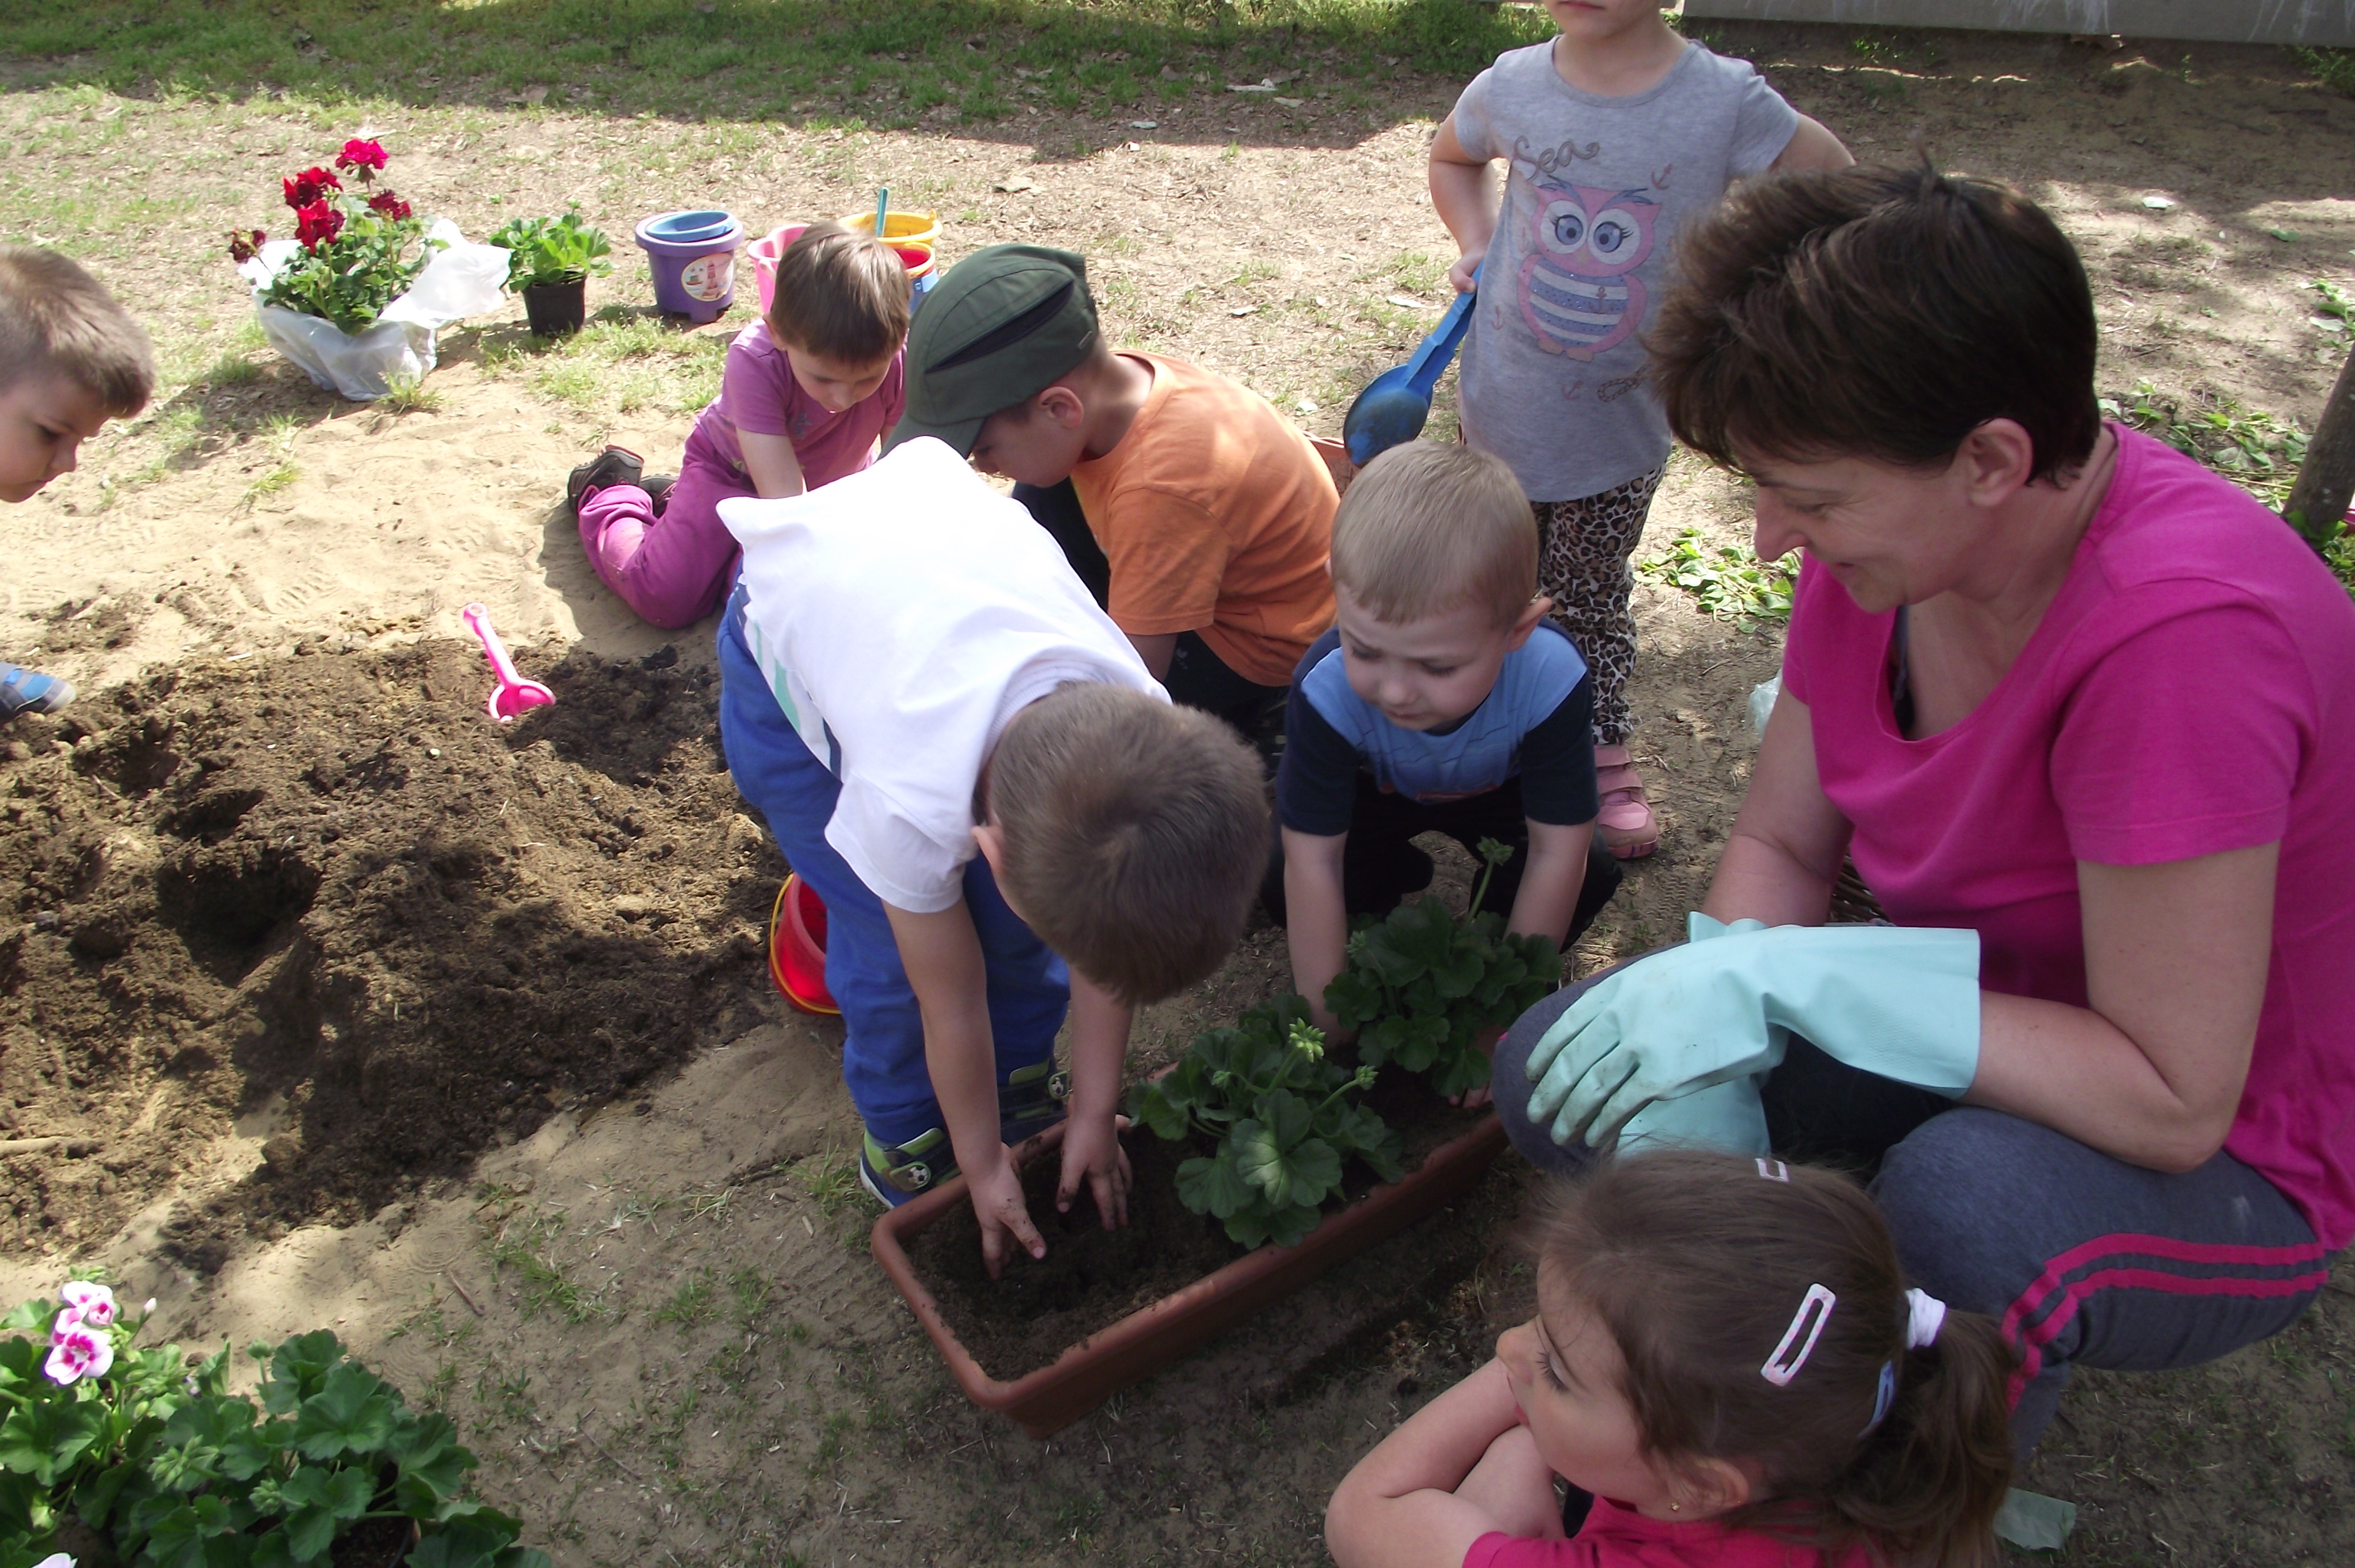 Green Holidays and Celebrations in Kindergartens with Project-based Learning and Experiential Education - Hungary